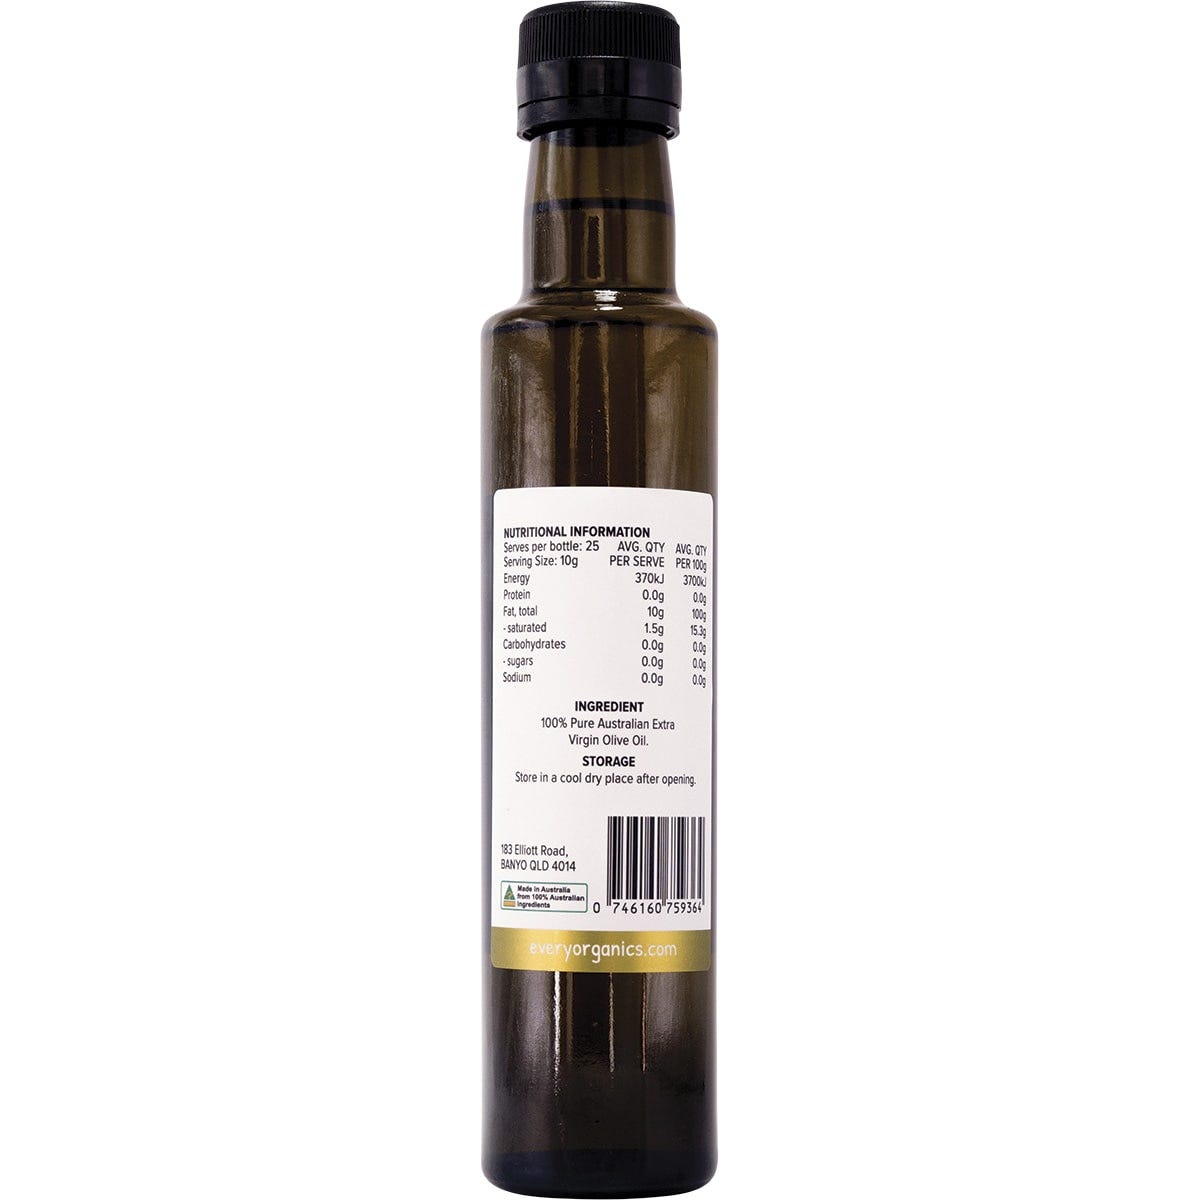 Everyorganics Cold Smoked Extra Virgin Olive Oil Pure Aust. Oil